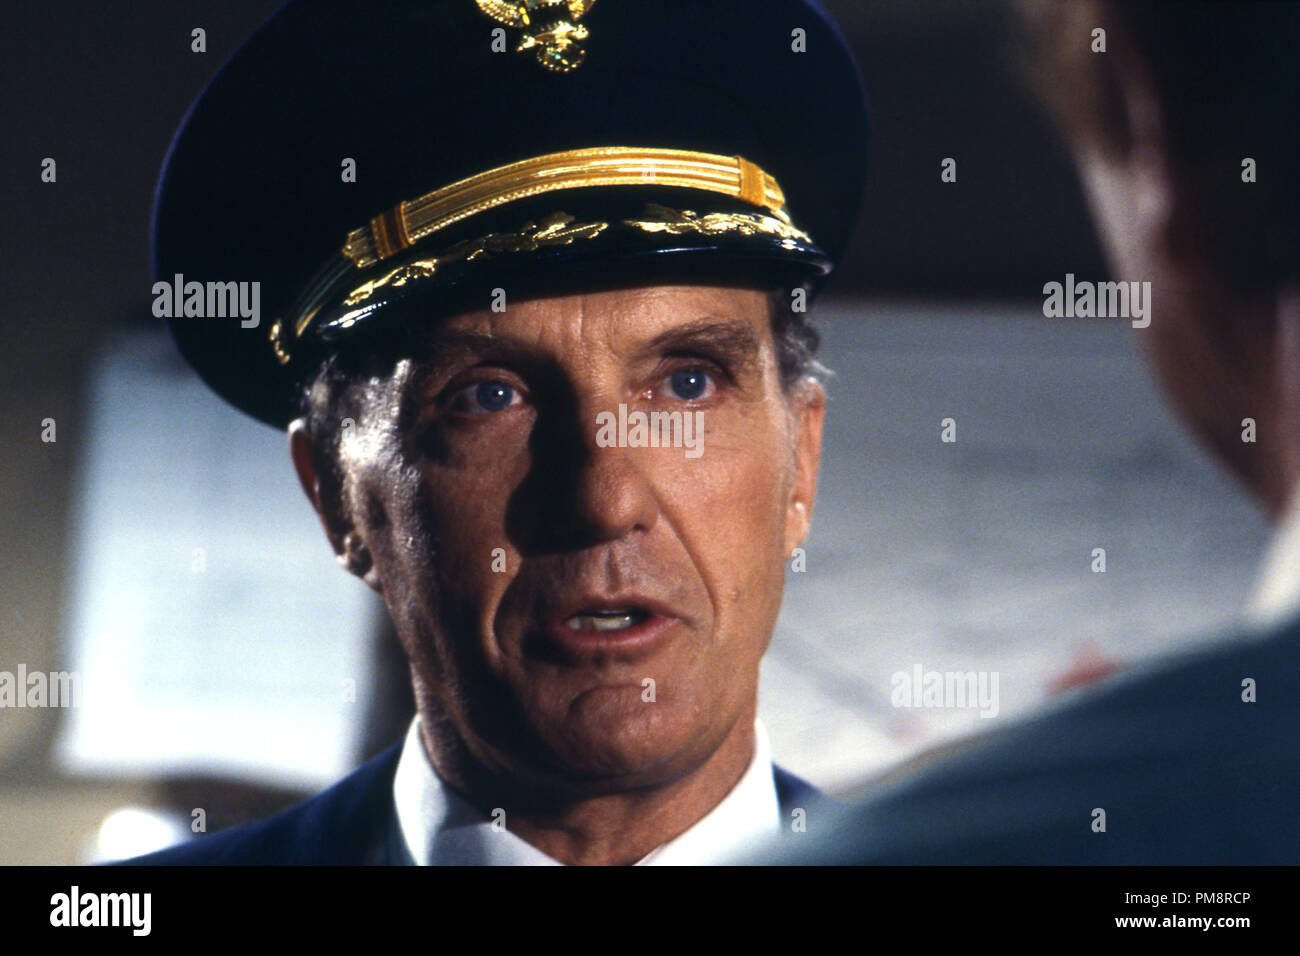 Studio Publicity Still from 'Airplane' Robert Stack © 1981 Paramount  All Rights Reserved   File Reference # 31713212THA  For Editorial Use Only Stock Photo